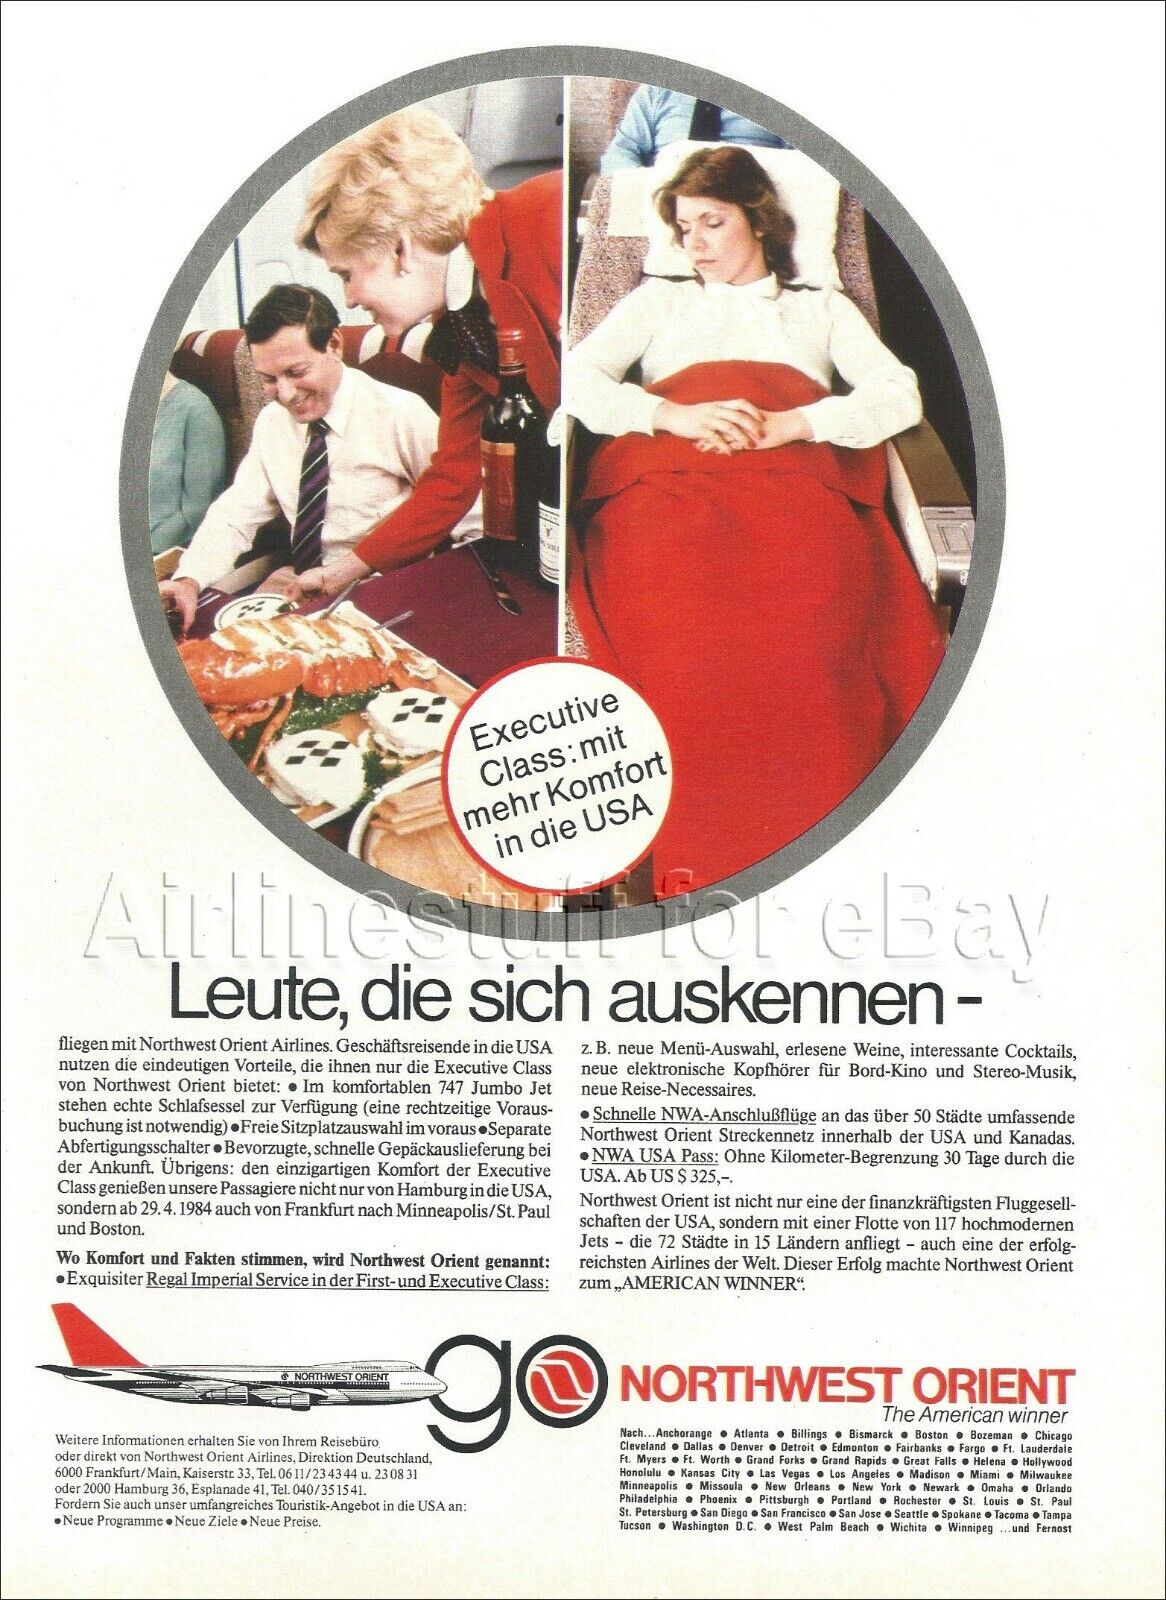 1980s NORTHWEST ORIENT ad BOEING 747 REGAL IMPERIAL SERVICE airlines GERMAN v2